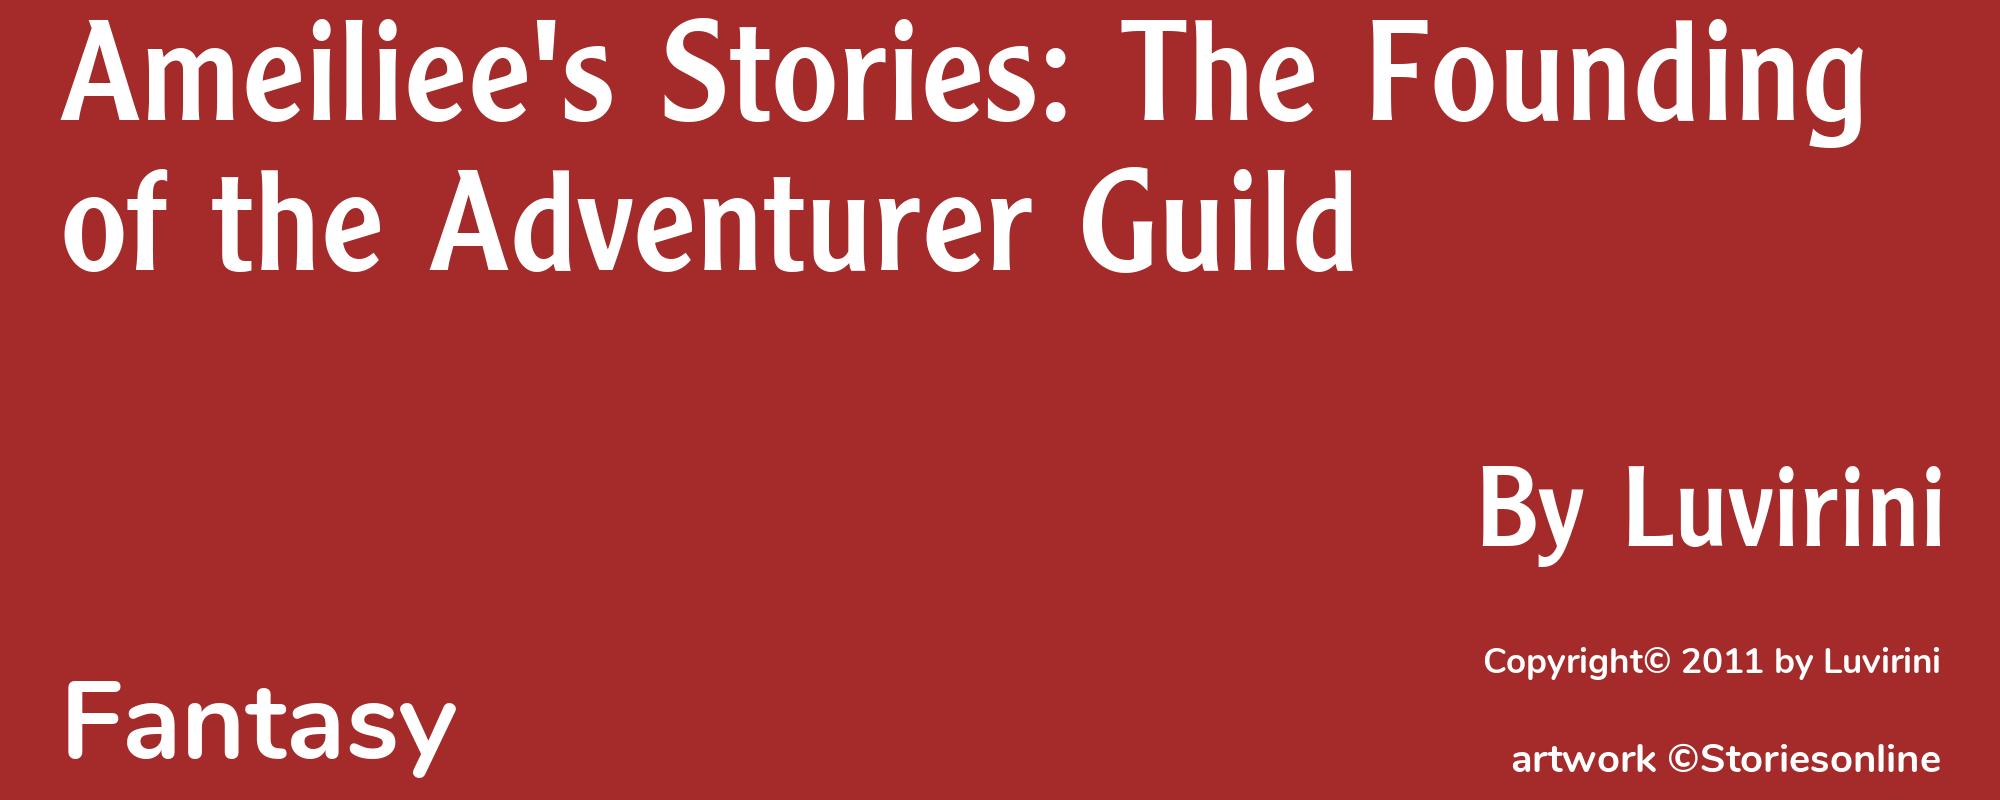 Ameiliee's Stories: The Founding of the Adventurer Guild - Cover